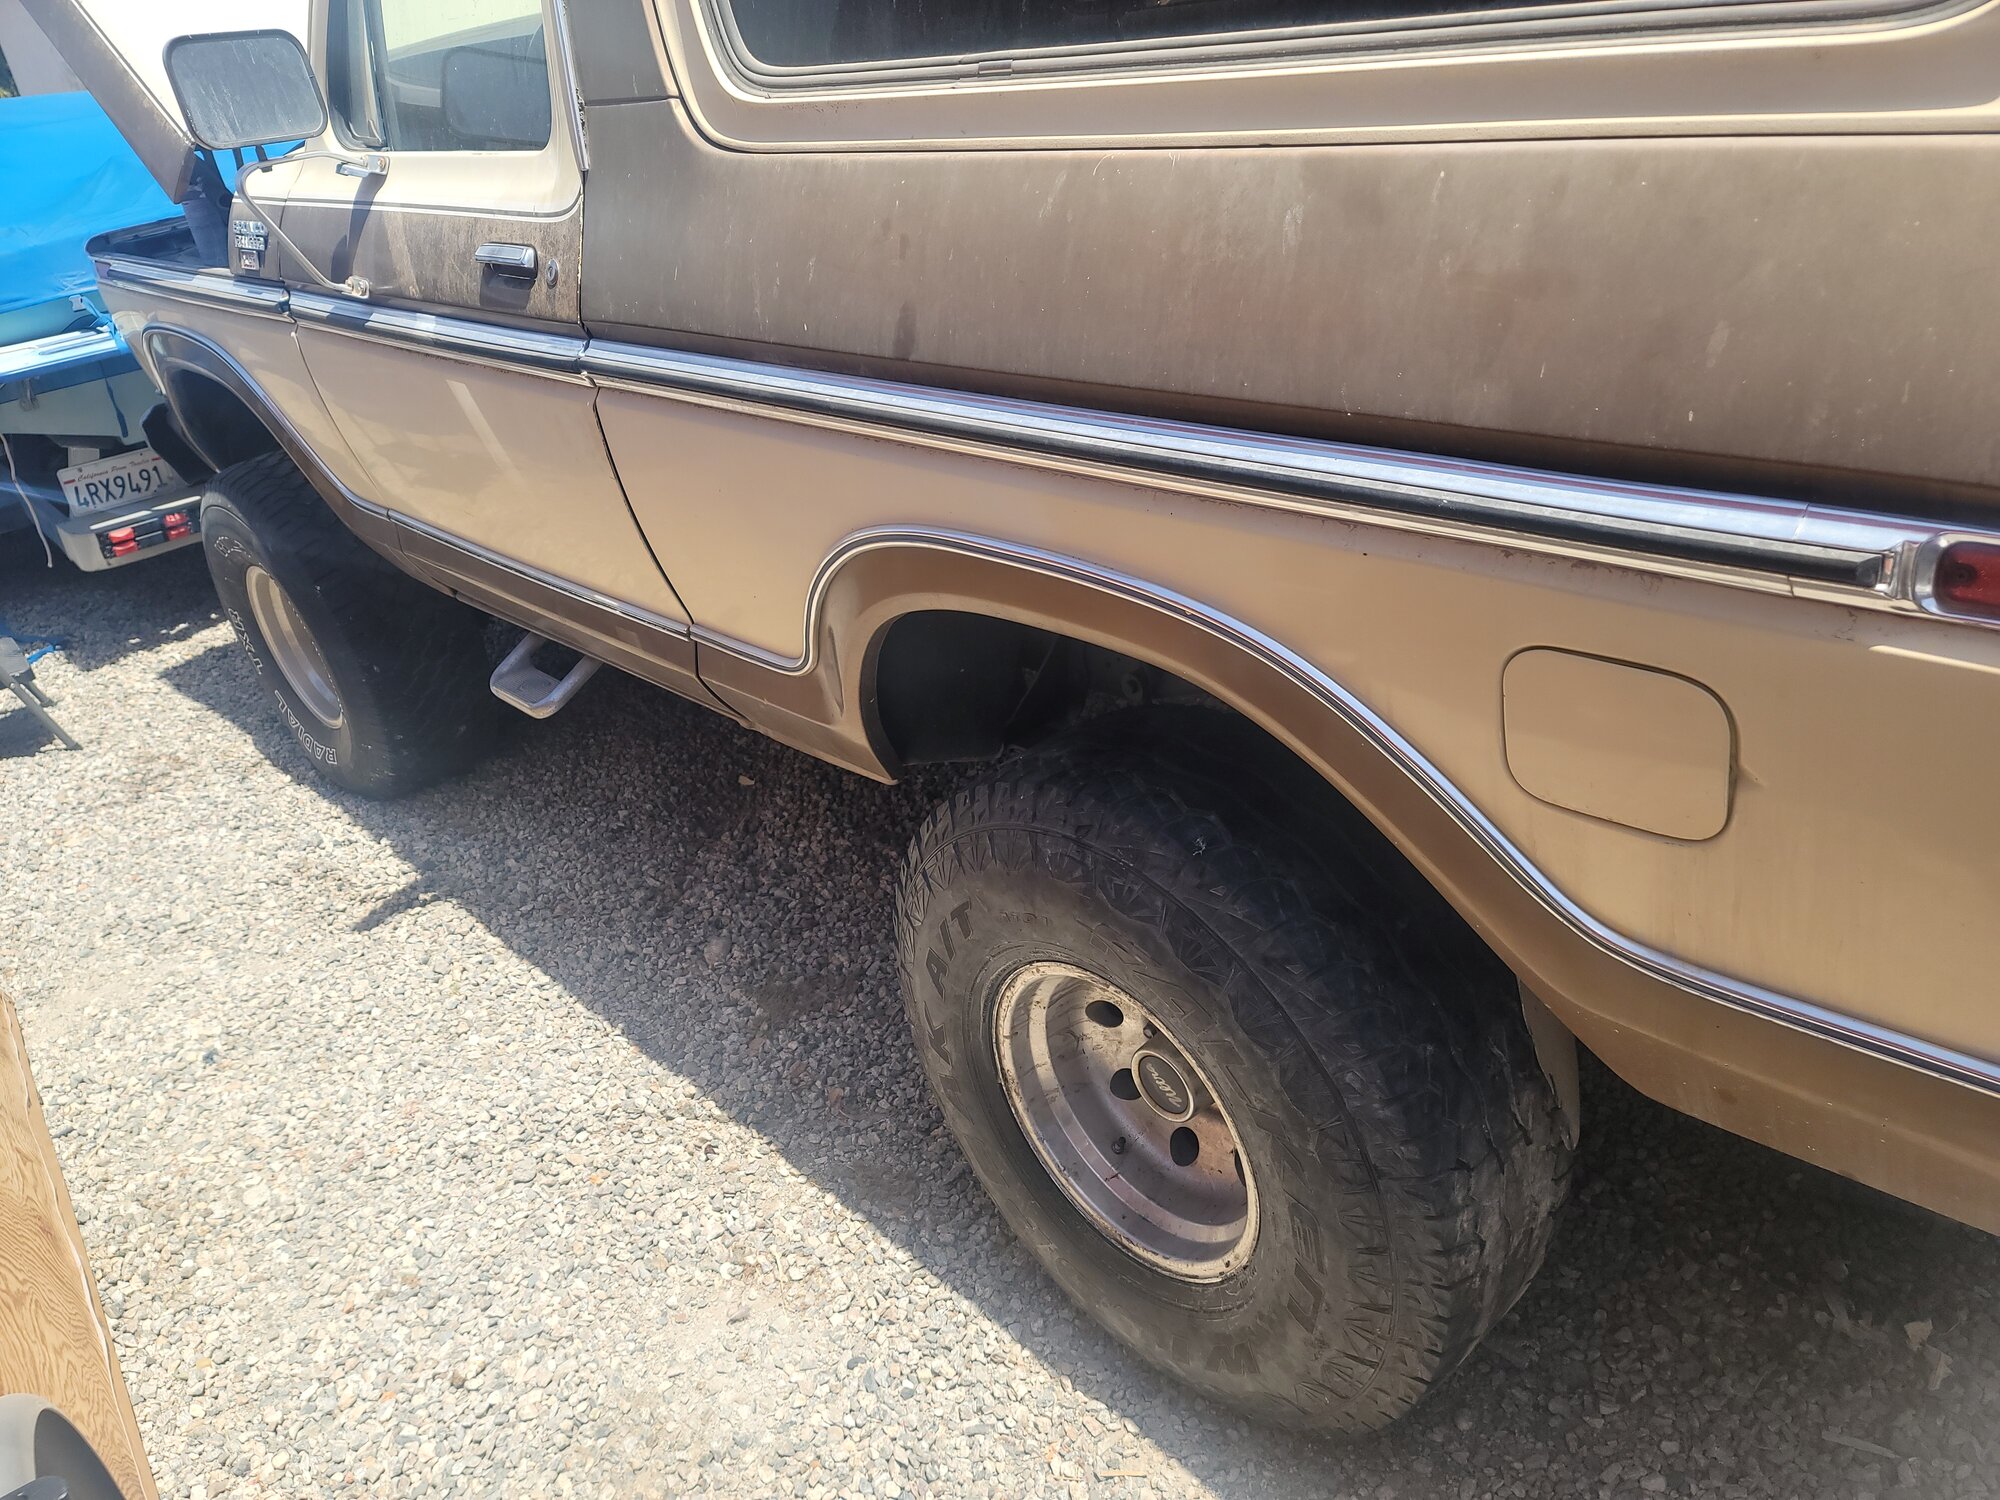 1979 Ford Bronco - 1979 Bronco Off-Road -  Ford Truck Profile